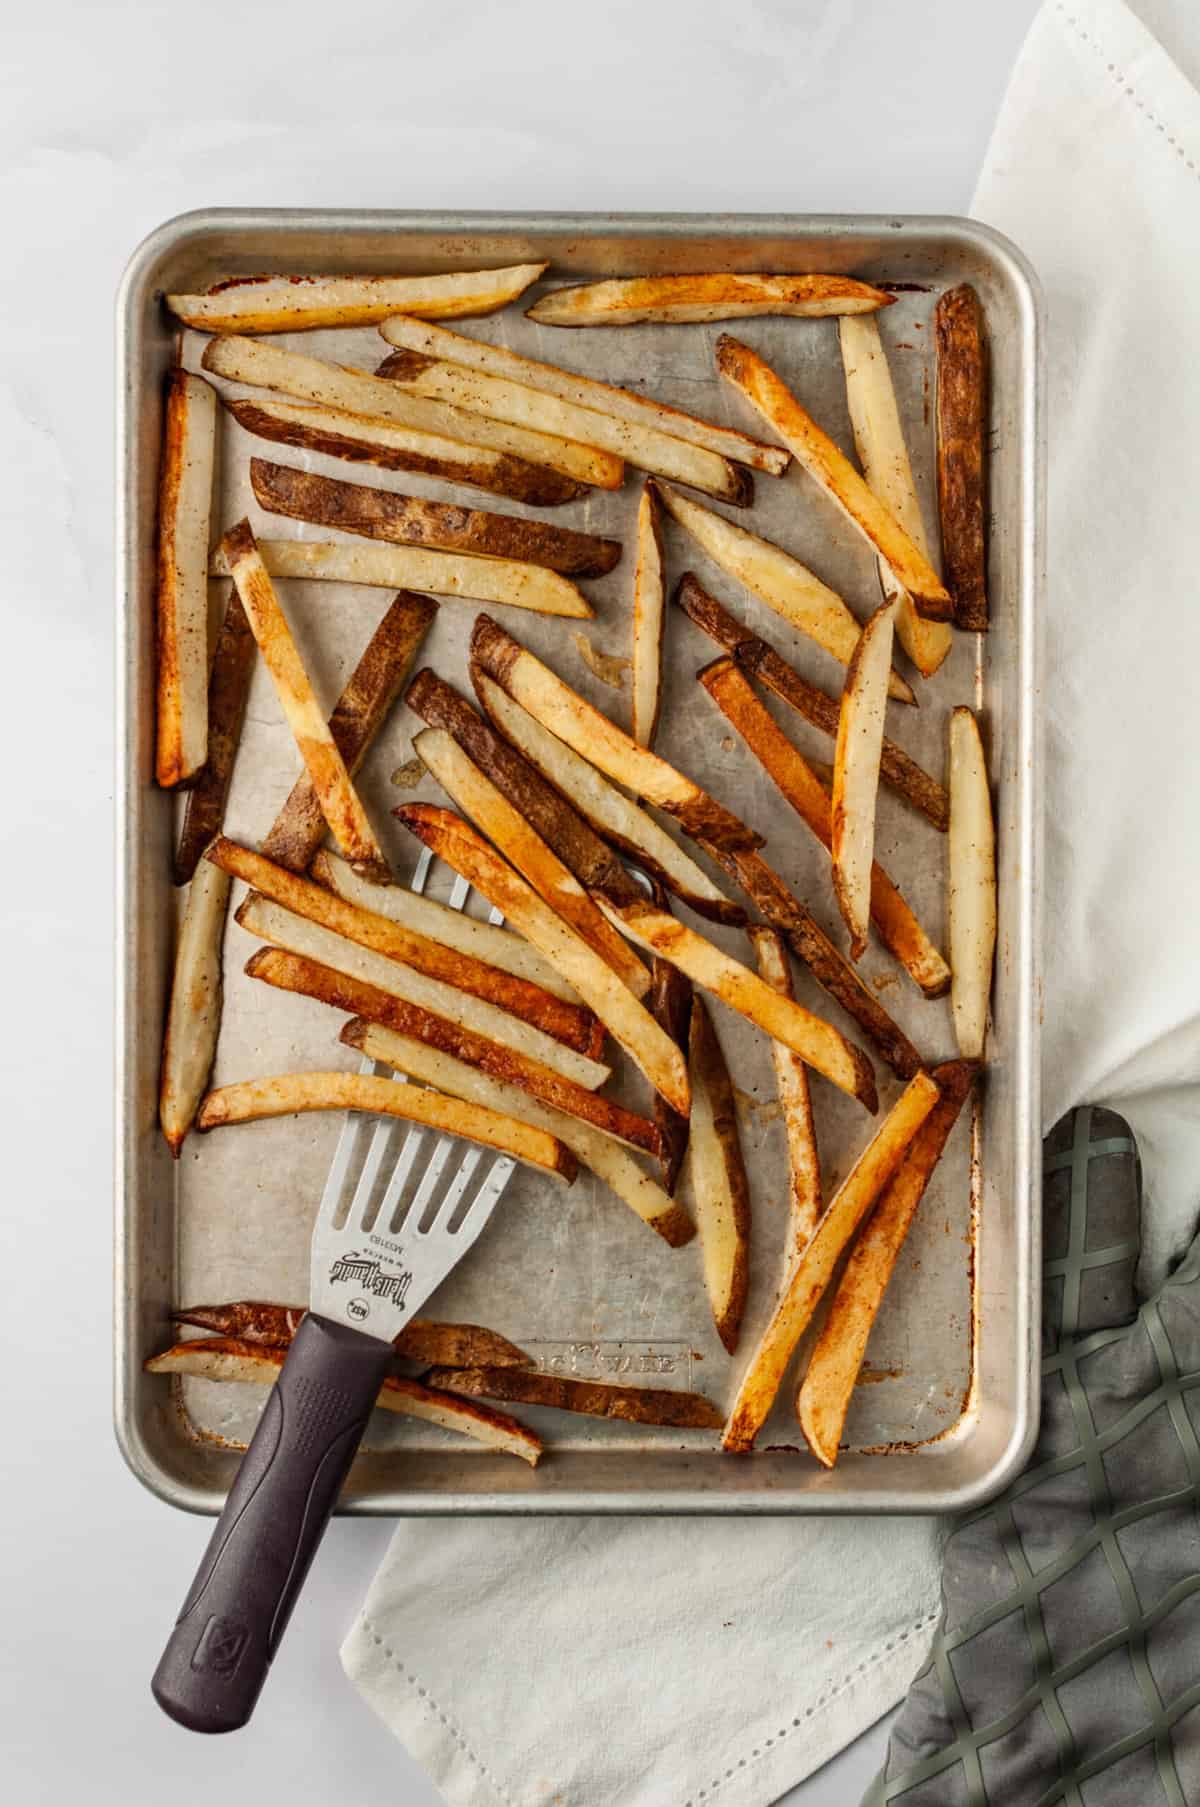 Overhead view of baked french fries on sheet pan